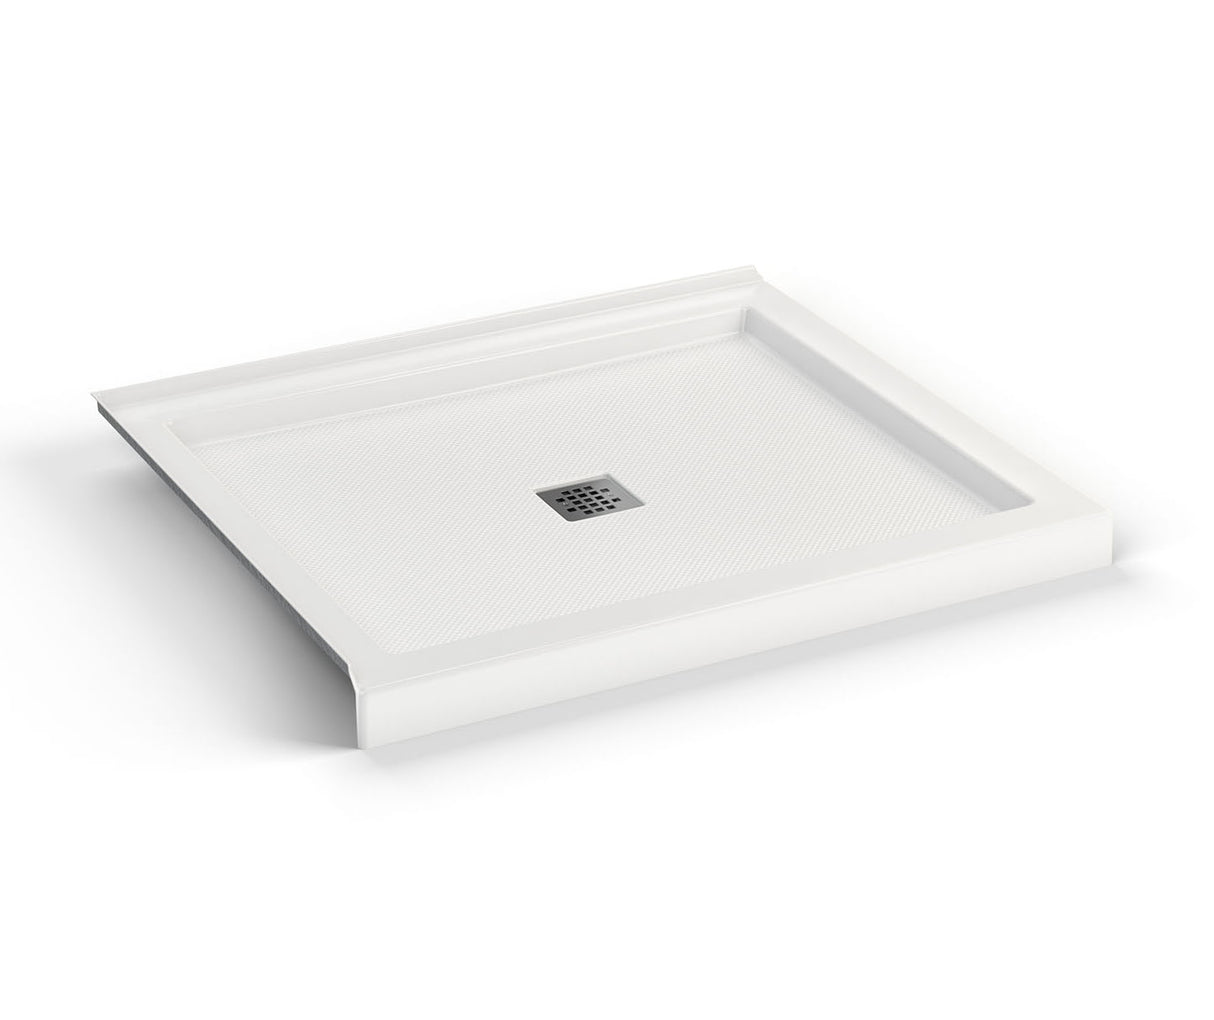 MAAX 420034-542-001-100 B3Square 4236 Acrylic Corner Left Shower Base in White with Anti-slip Bottom with Center Drain